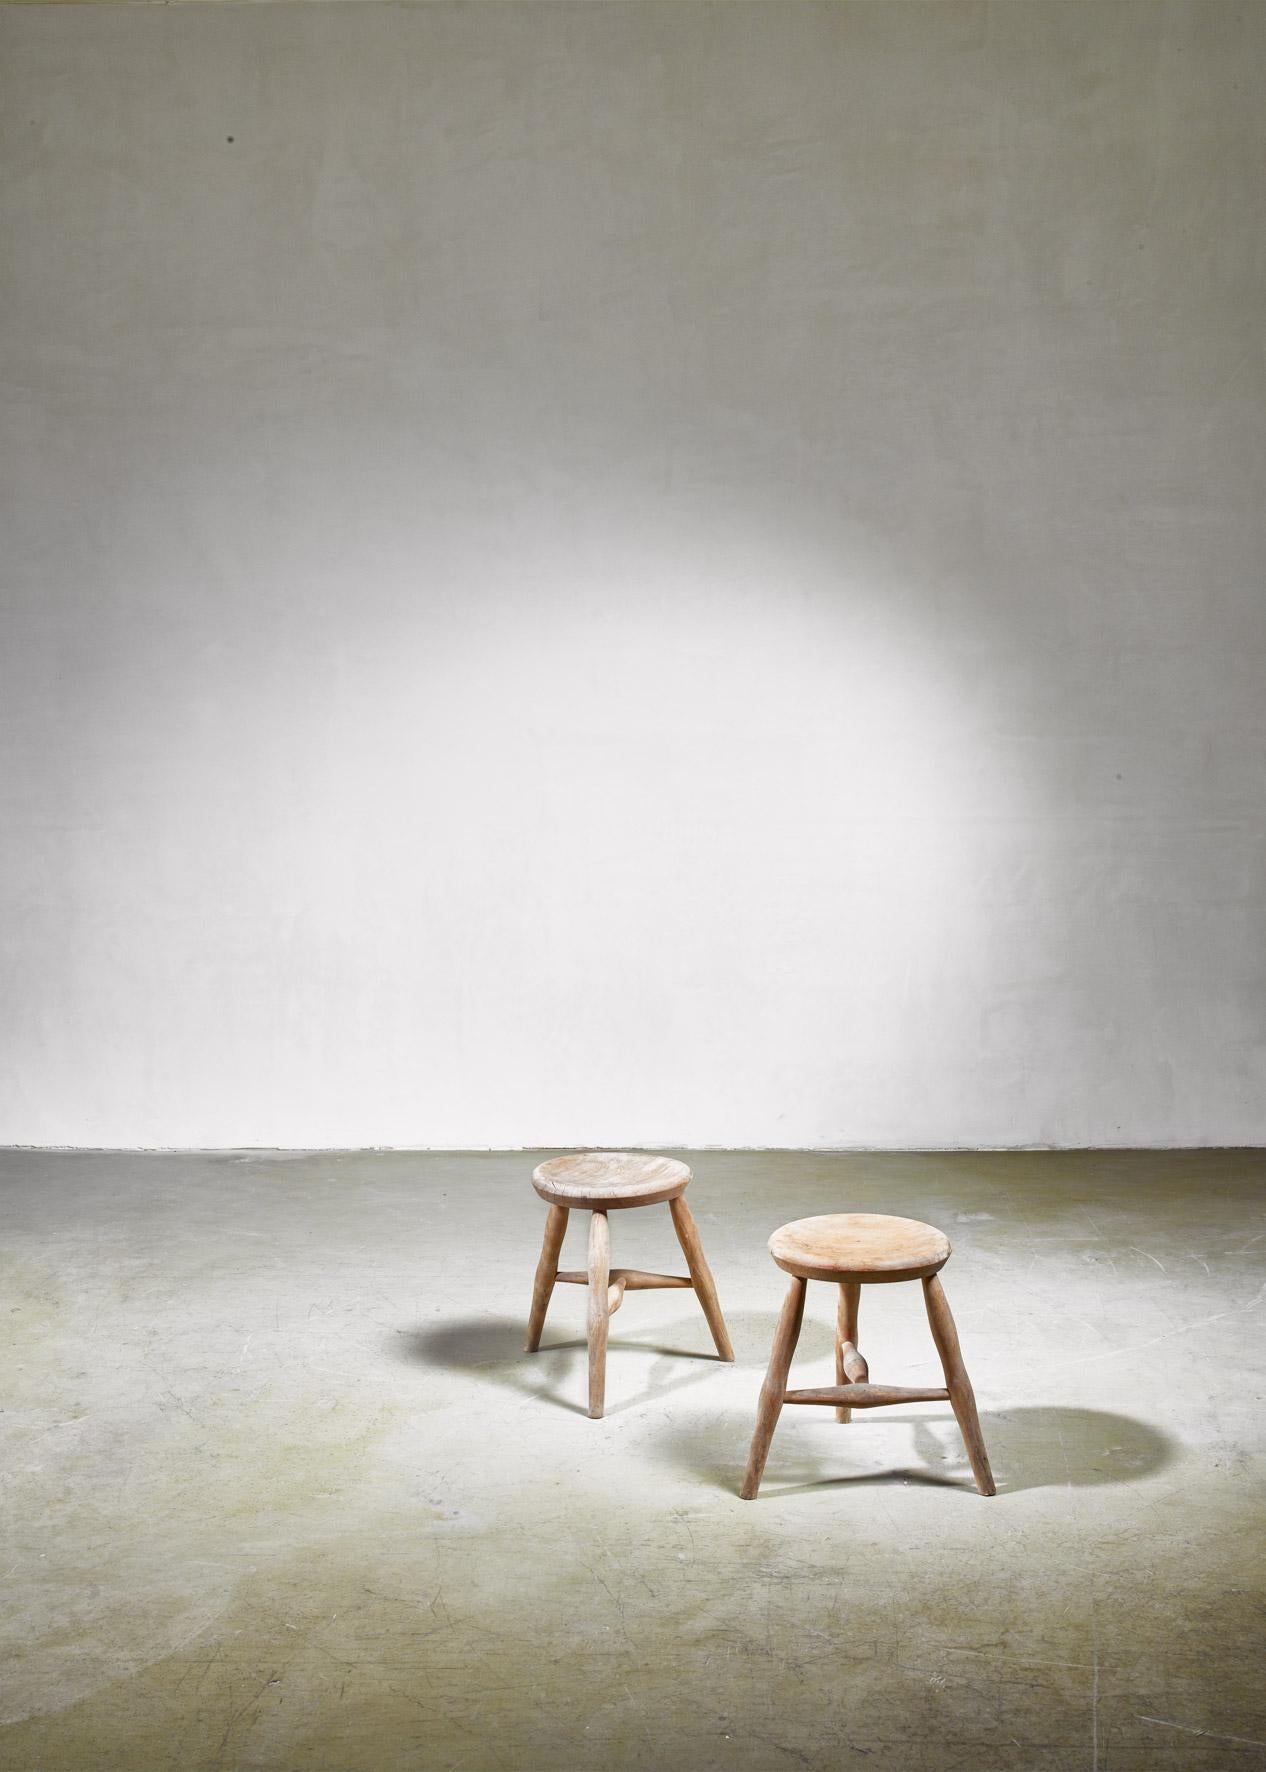 A pair of oak tripod stools with a T-shaped cross-bar.
The stools have a round (35 cm diameter) seating and can also double as side tables.